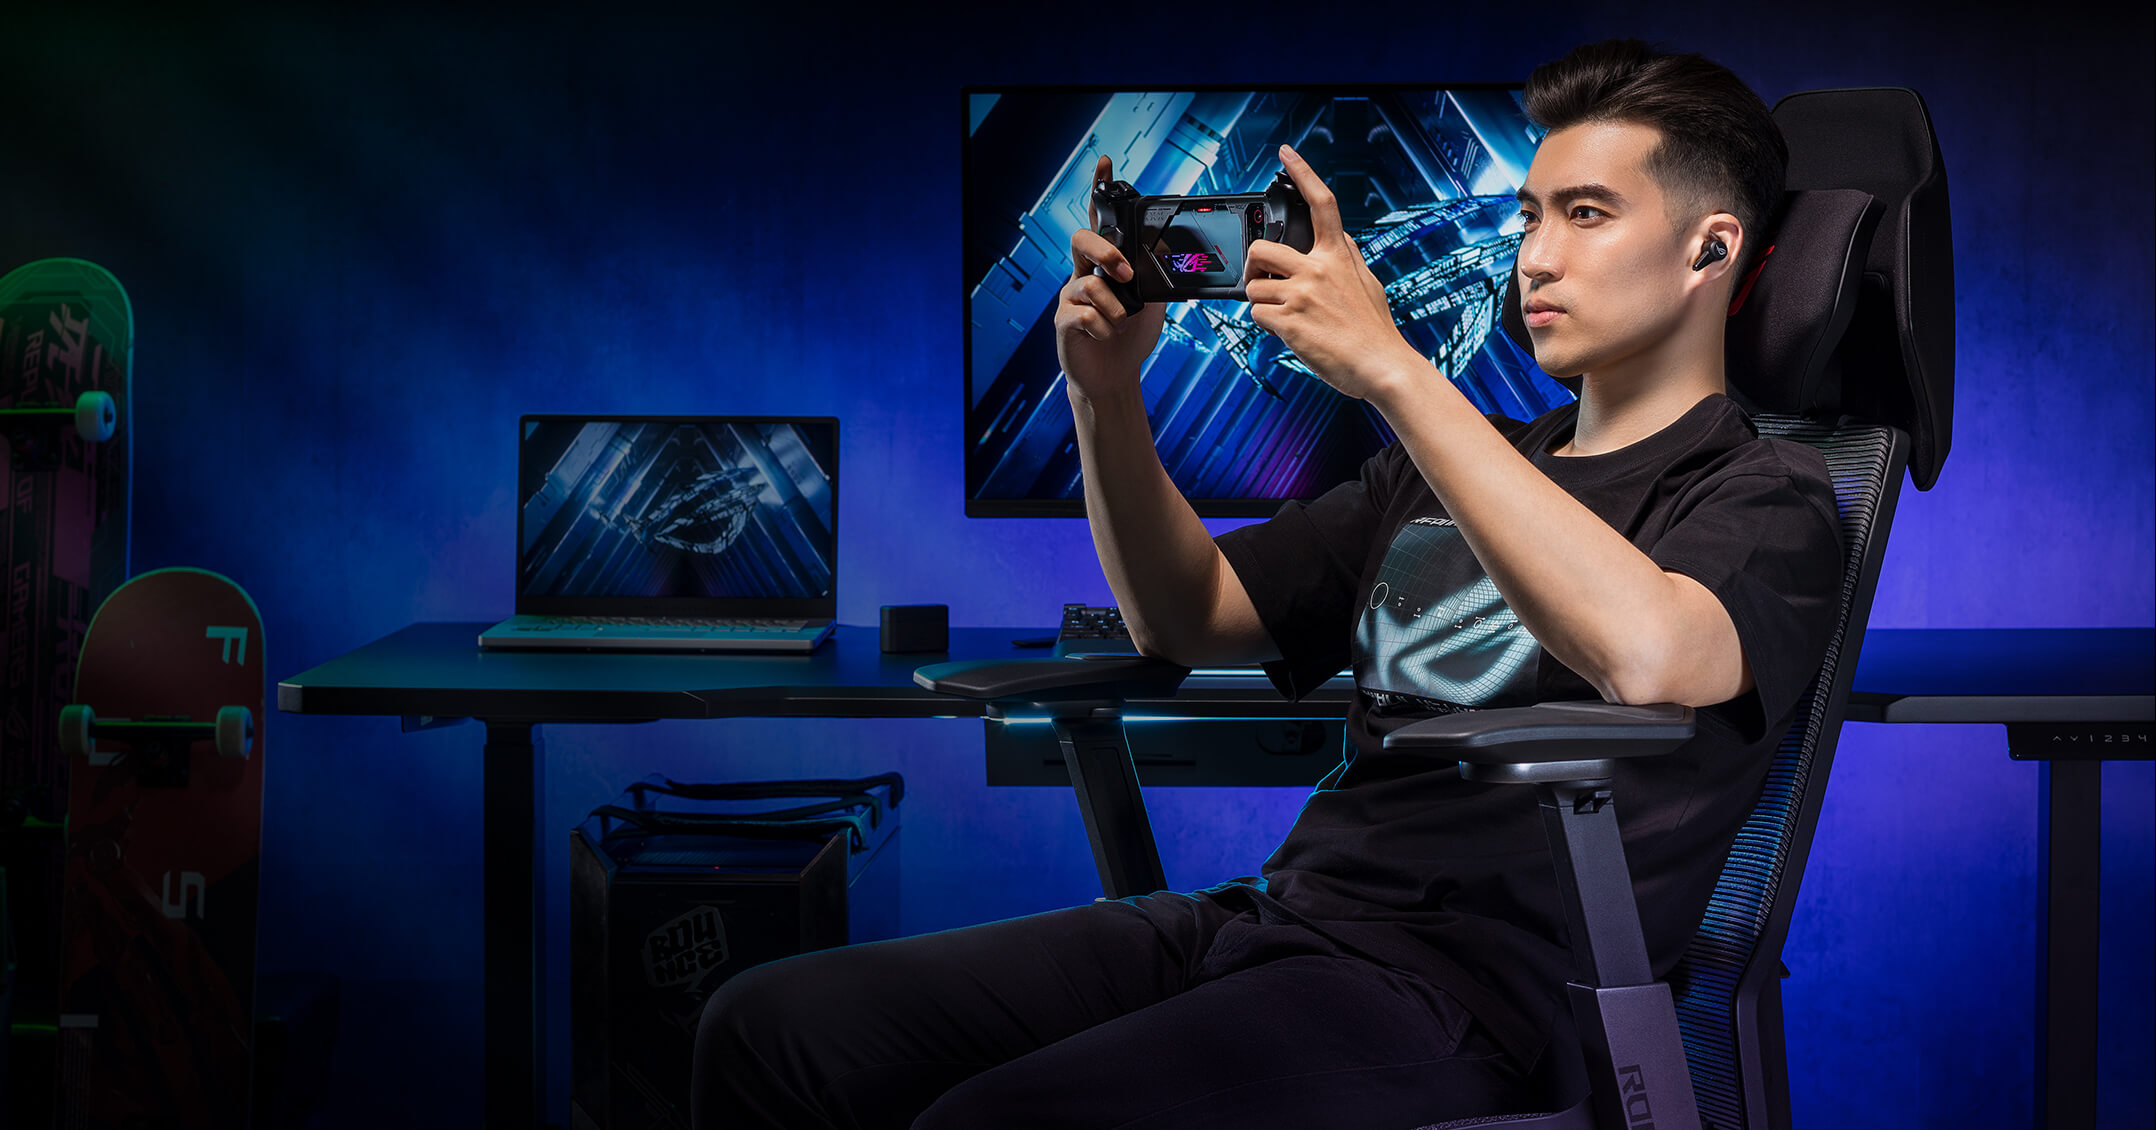 A guy gaming on mobile using the mobile gaming mode of ROG Destrier Ergo Gaming Chair